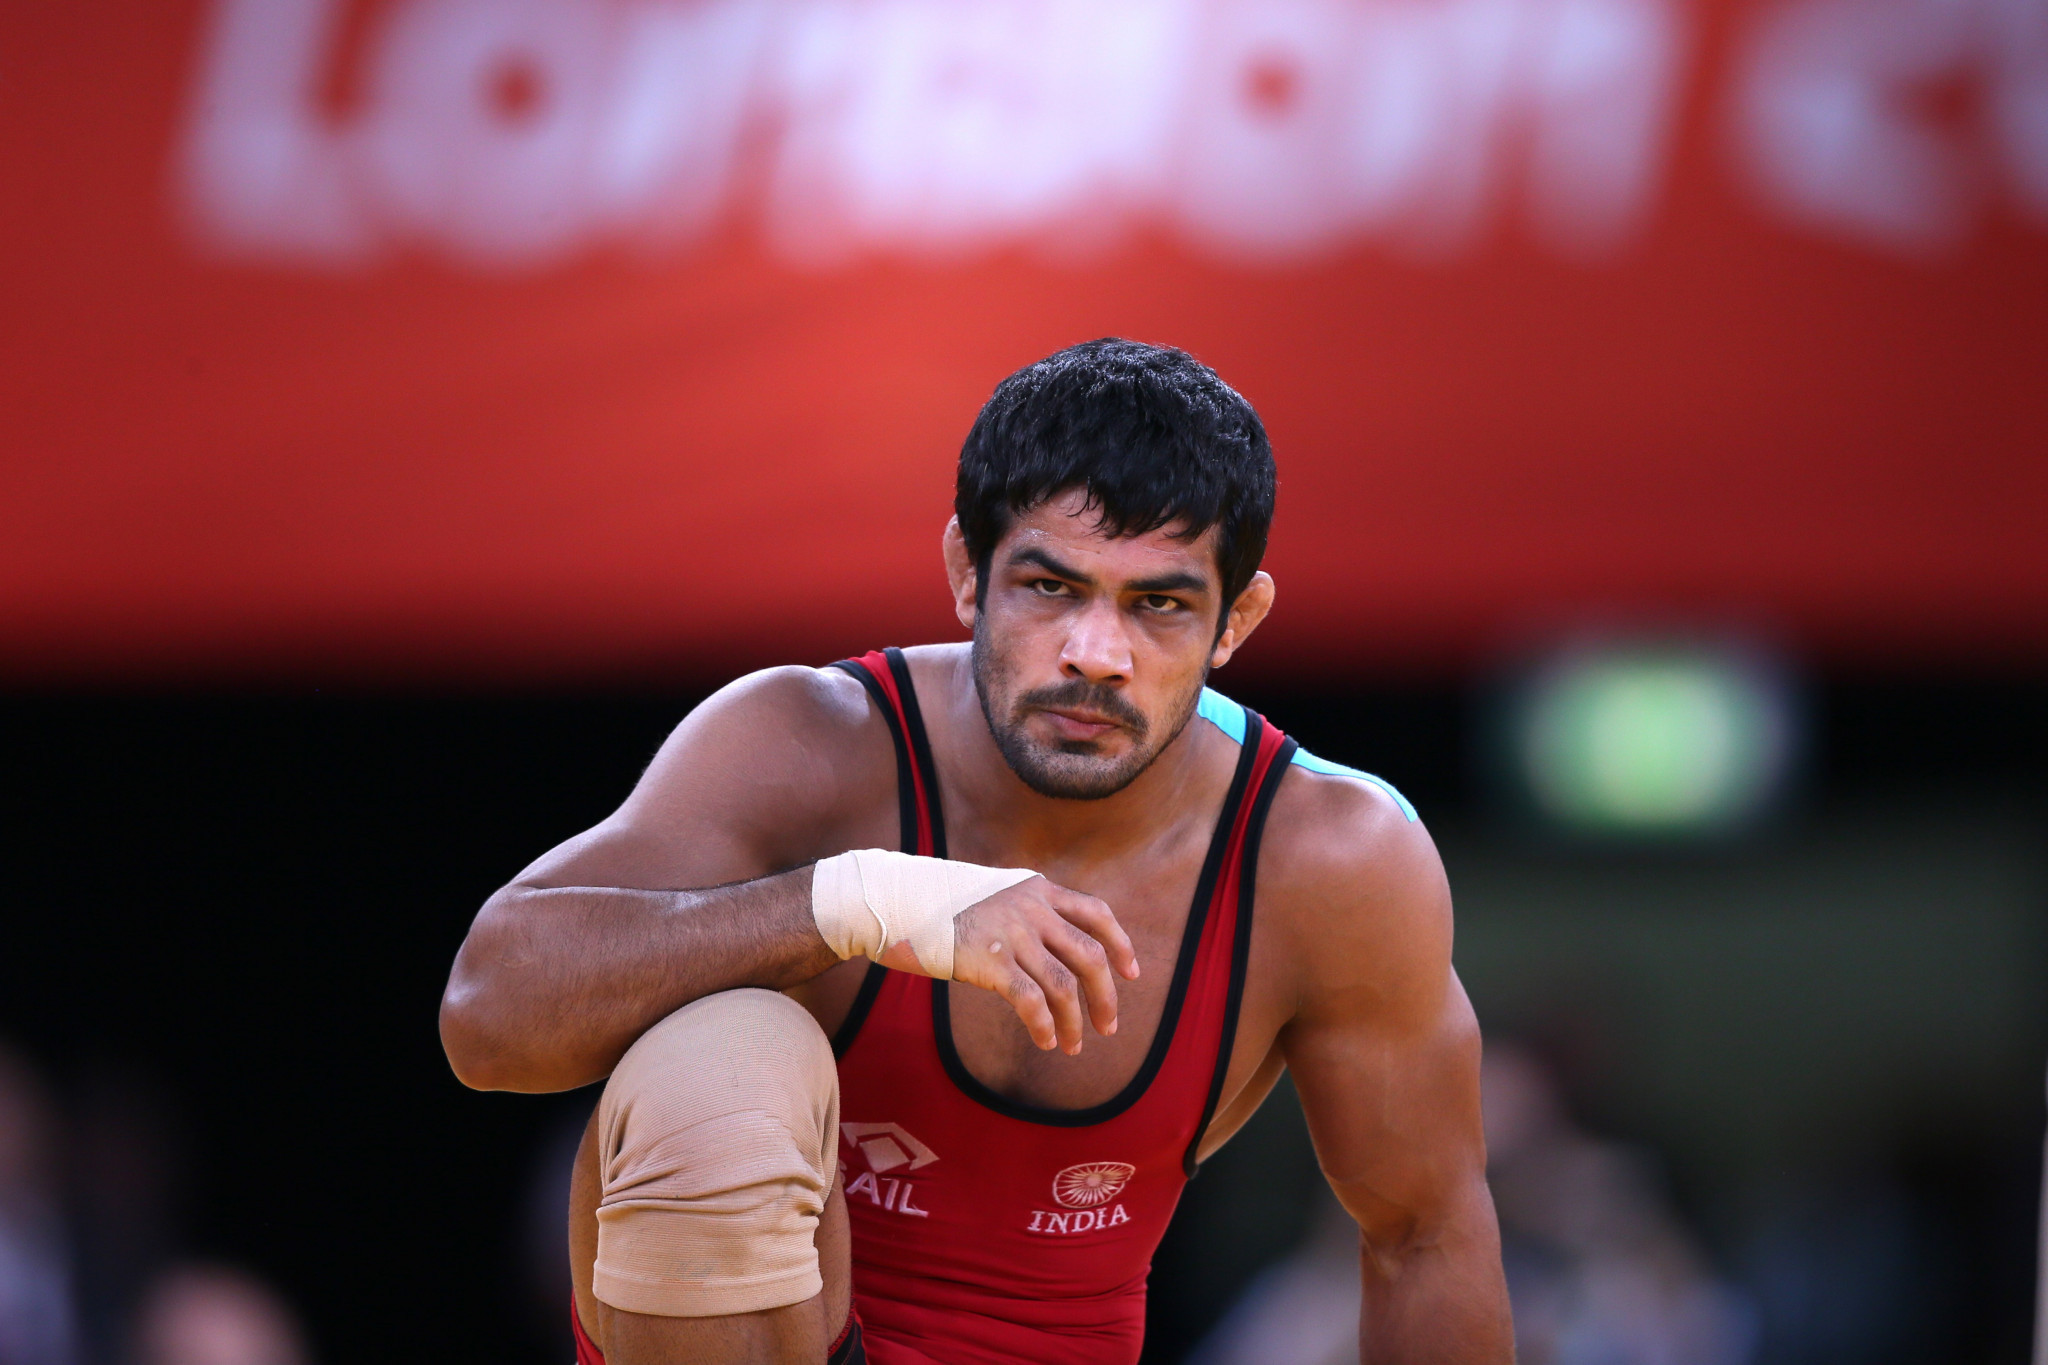 Sushil Kumar allegedly went on the run after Sagar Dhankar's death ©Getty Images